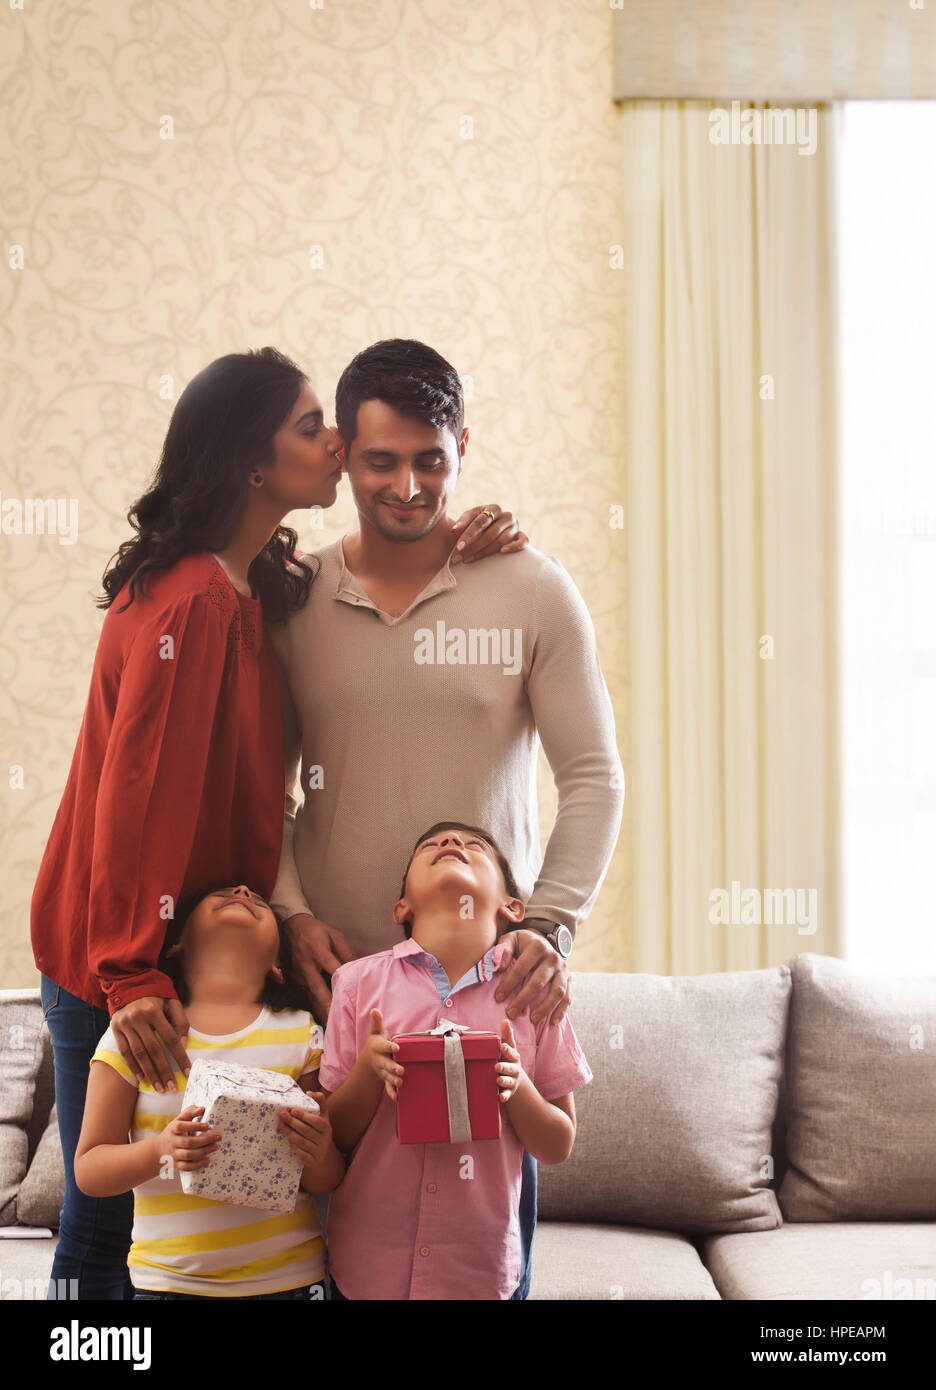 Woman kissing man on cheek, girl and boy holding gifts looking up with heads back Stock Photo